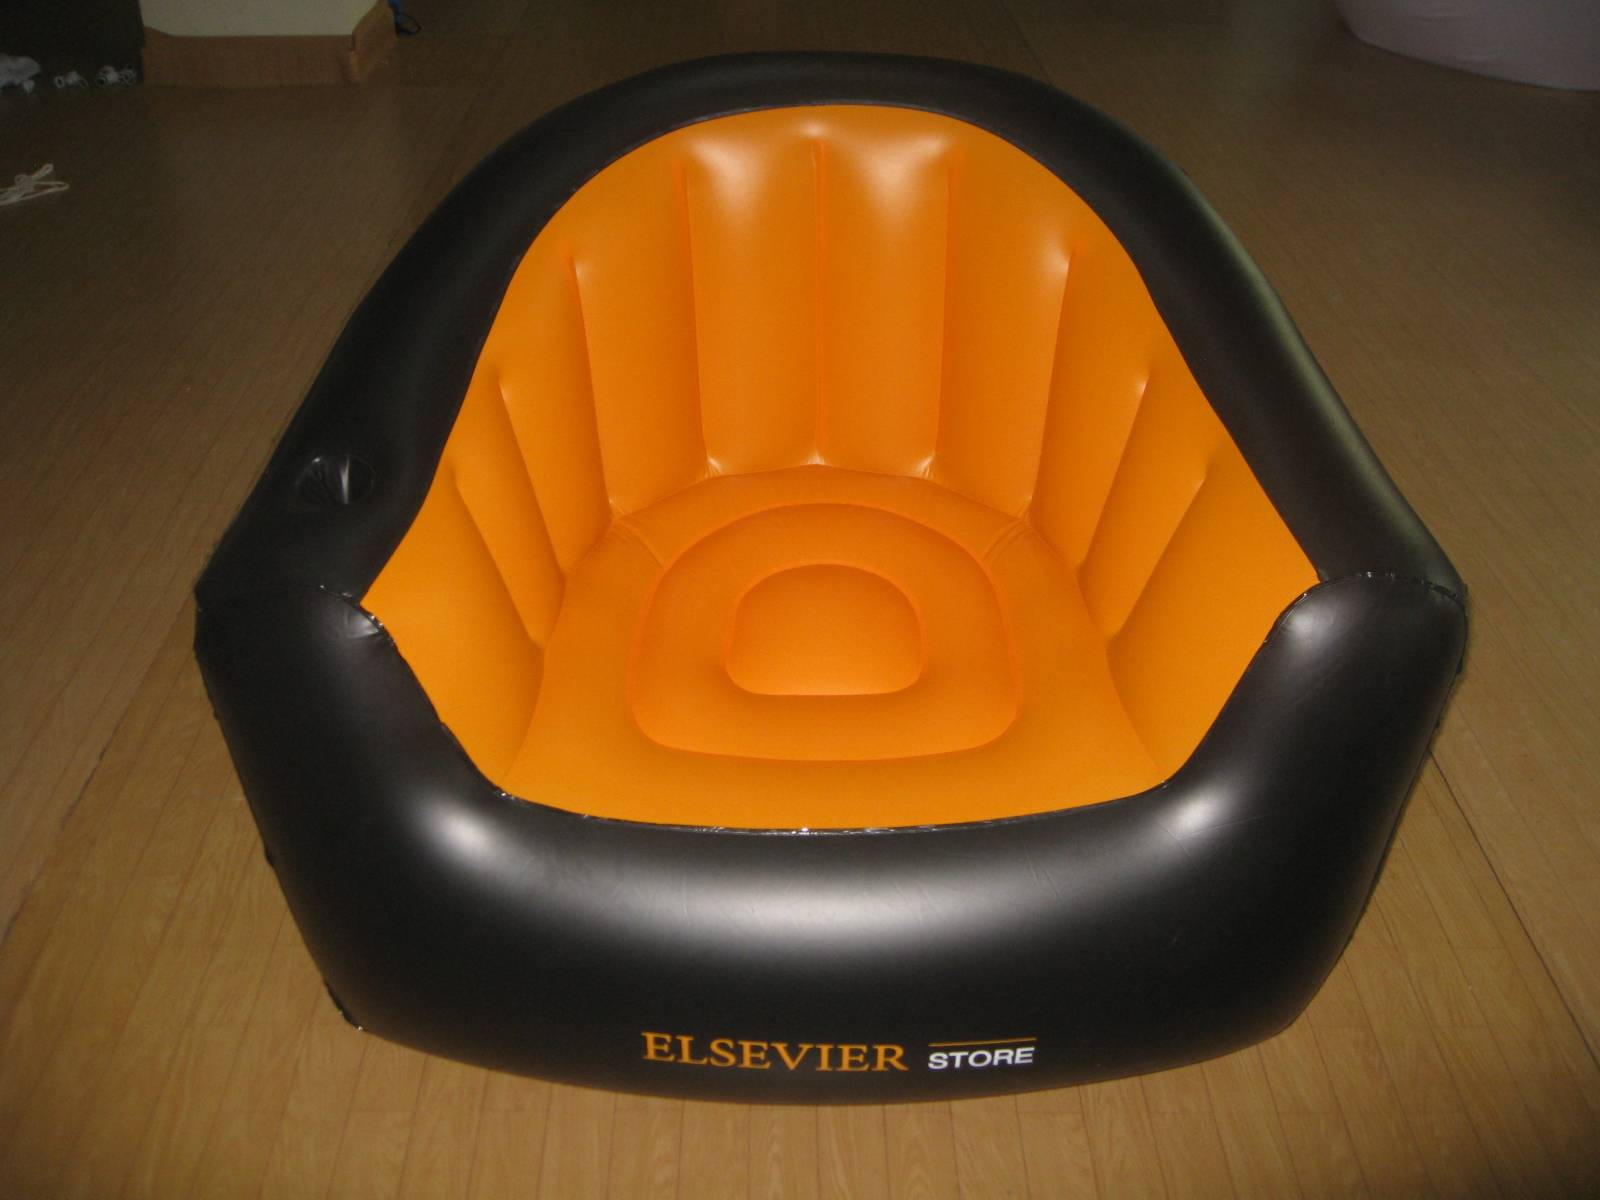 Customised Inflatable Furniture Couch Air Chair,Blow Up For Kids, Teens Room,Funny Indoor/Outdoor